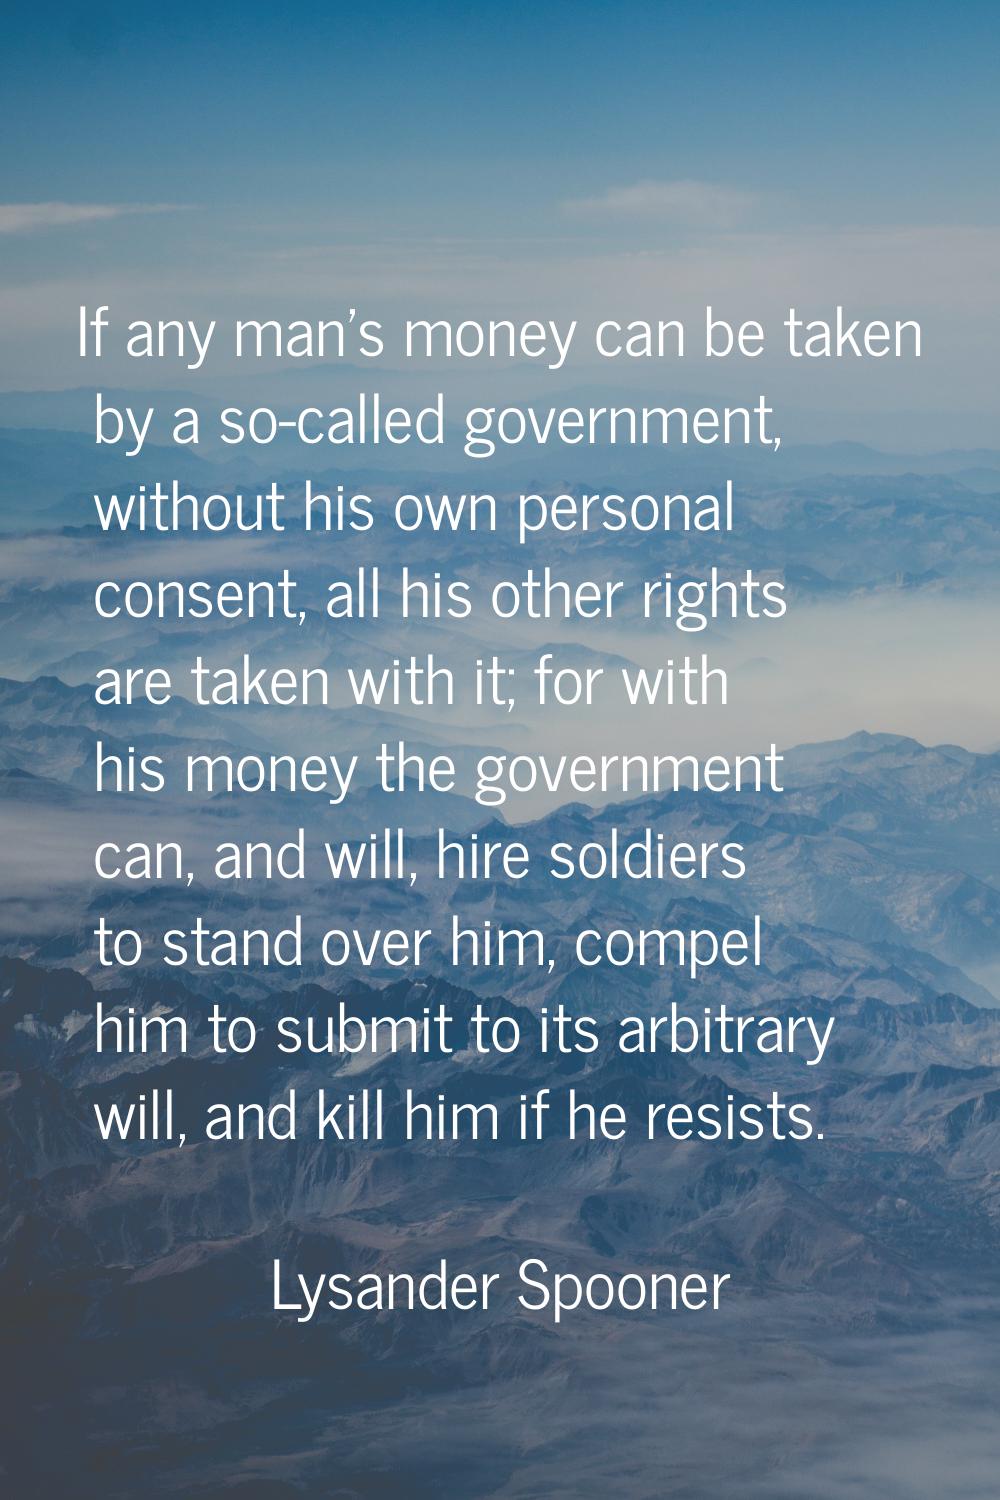 If any man's money can be taken by a so-called government, without his own personal consent, all hi